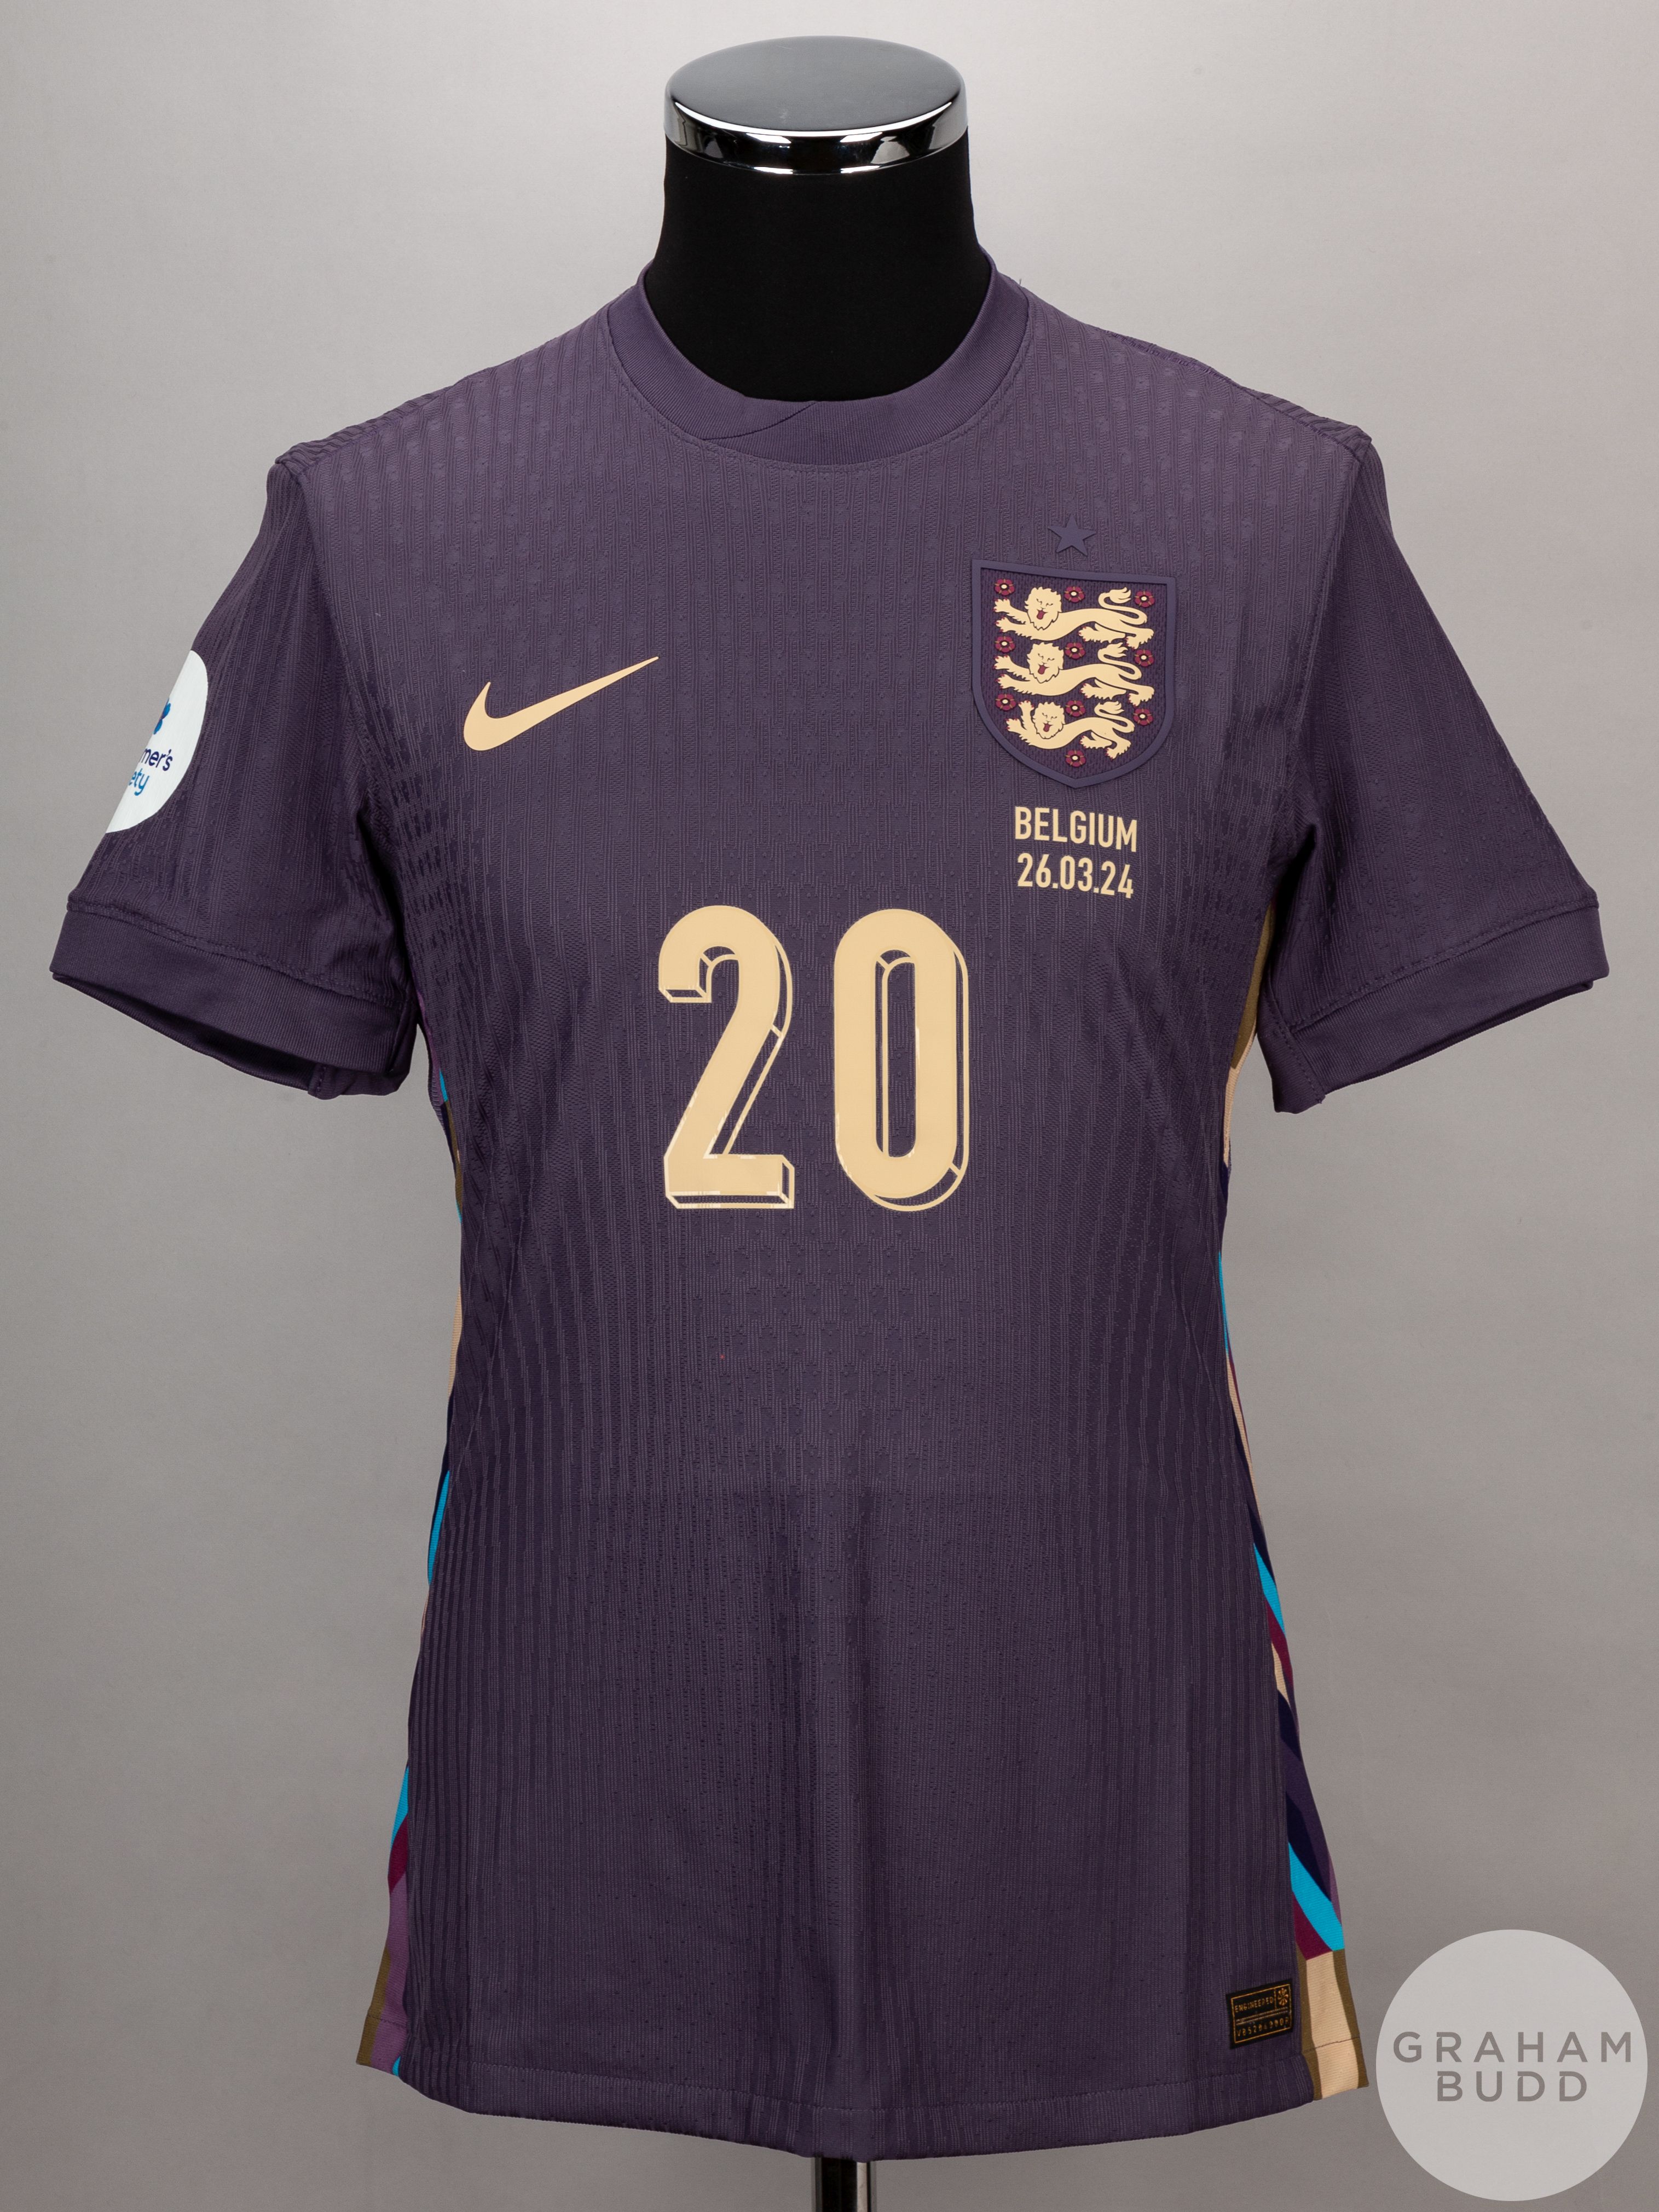 James Maddison signed dark pale maroon England No.20 away shirt v Belgium on 26th March 2024,